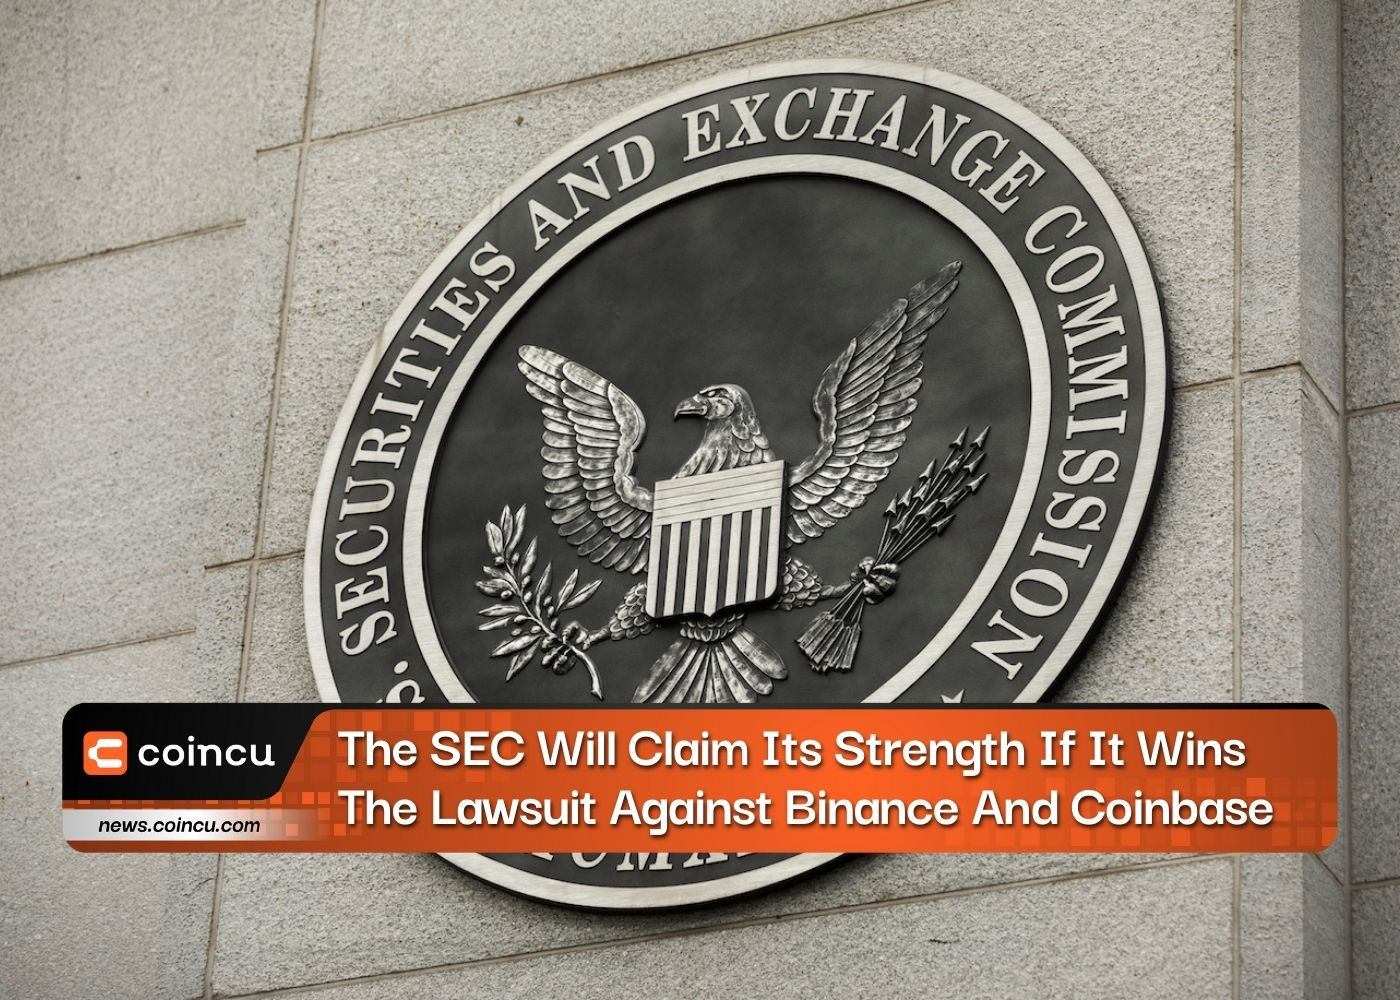 The SEC Will Claim Its Strength If It Wins The Lawsuit Against Binance And Coinbase